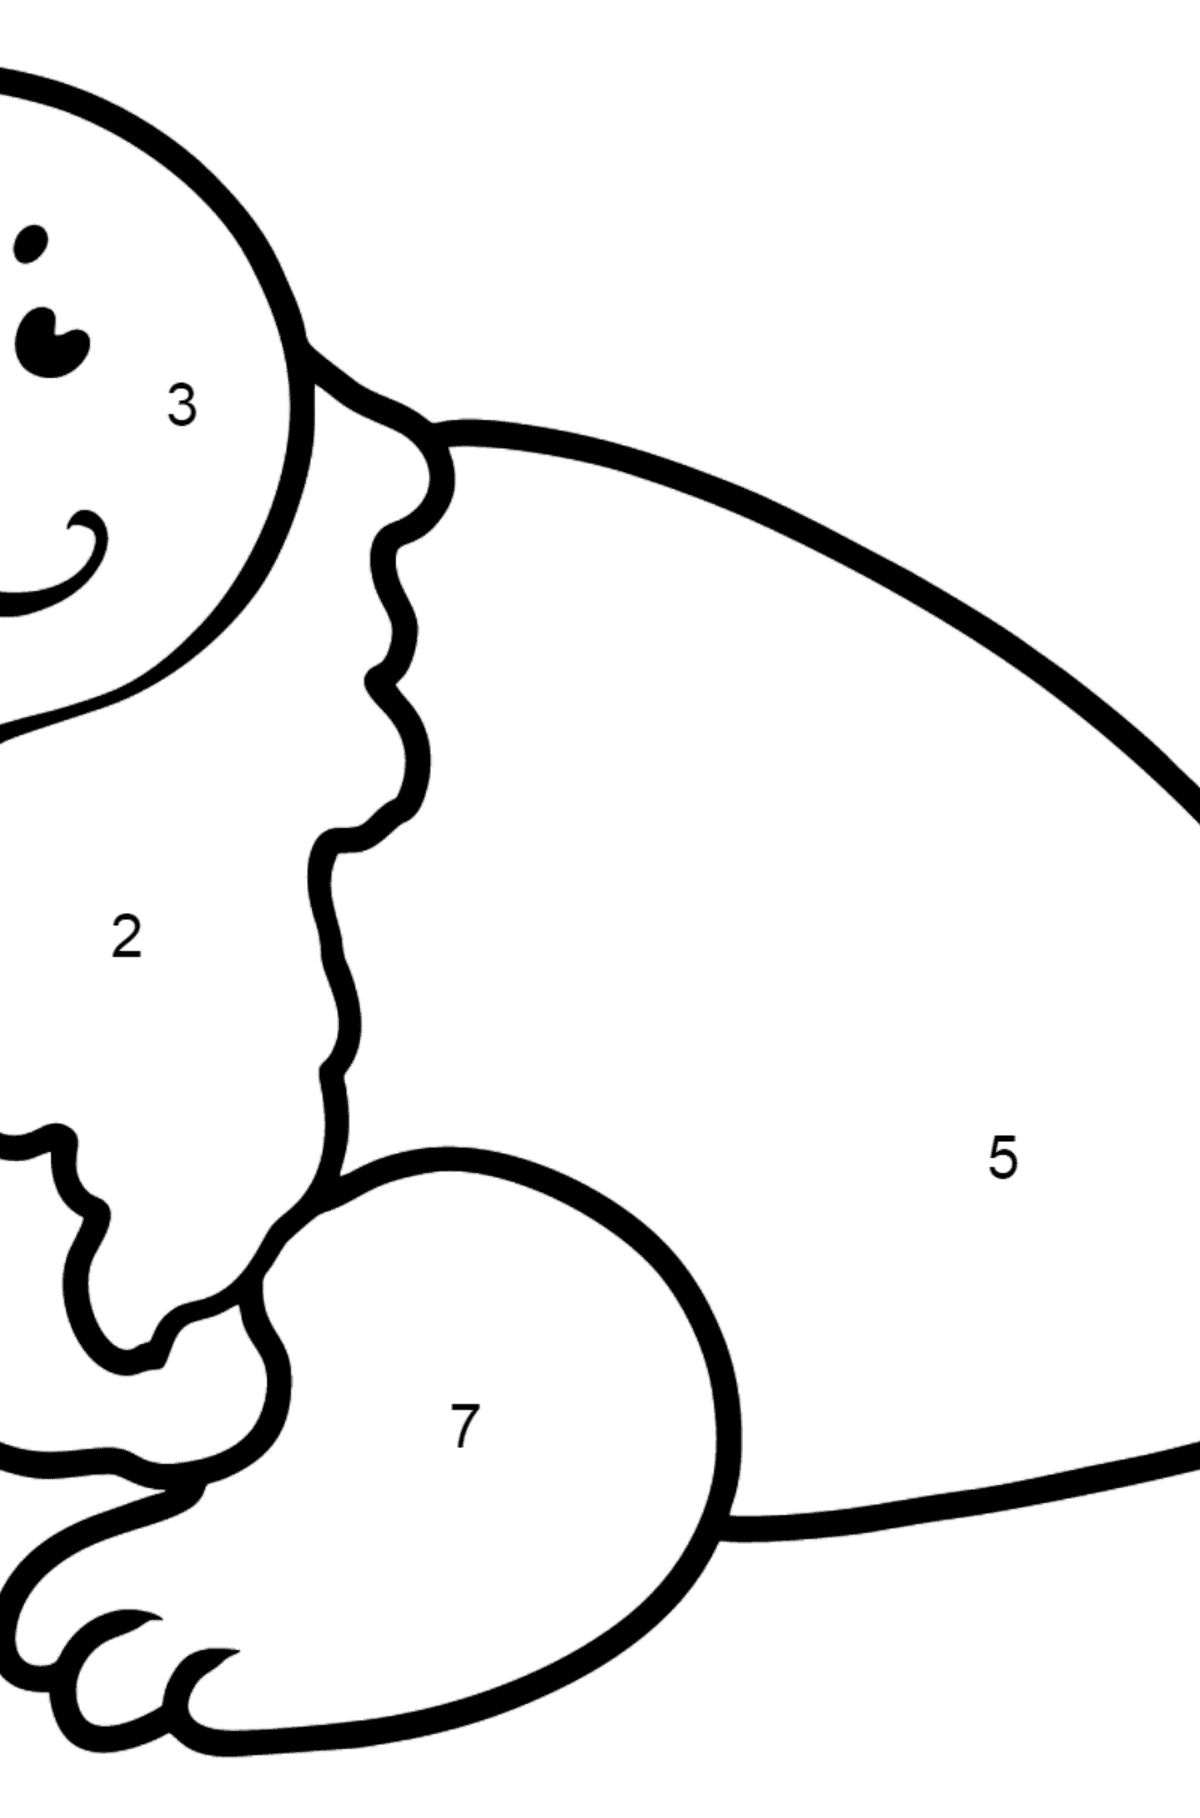 Seal coloring page - Coloring by Numbers for Kids